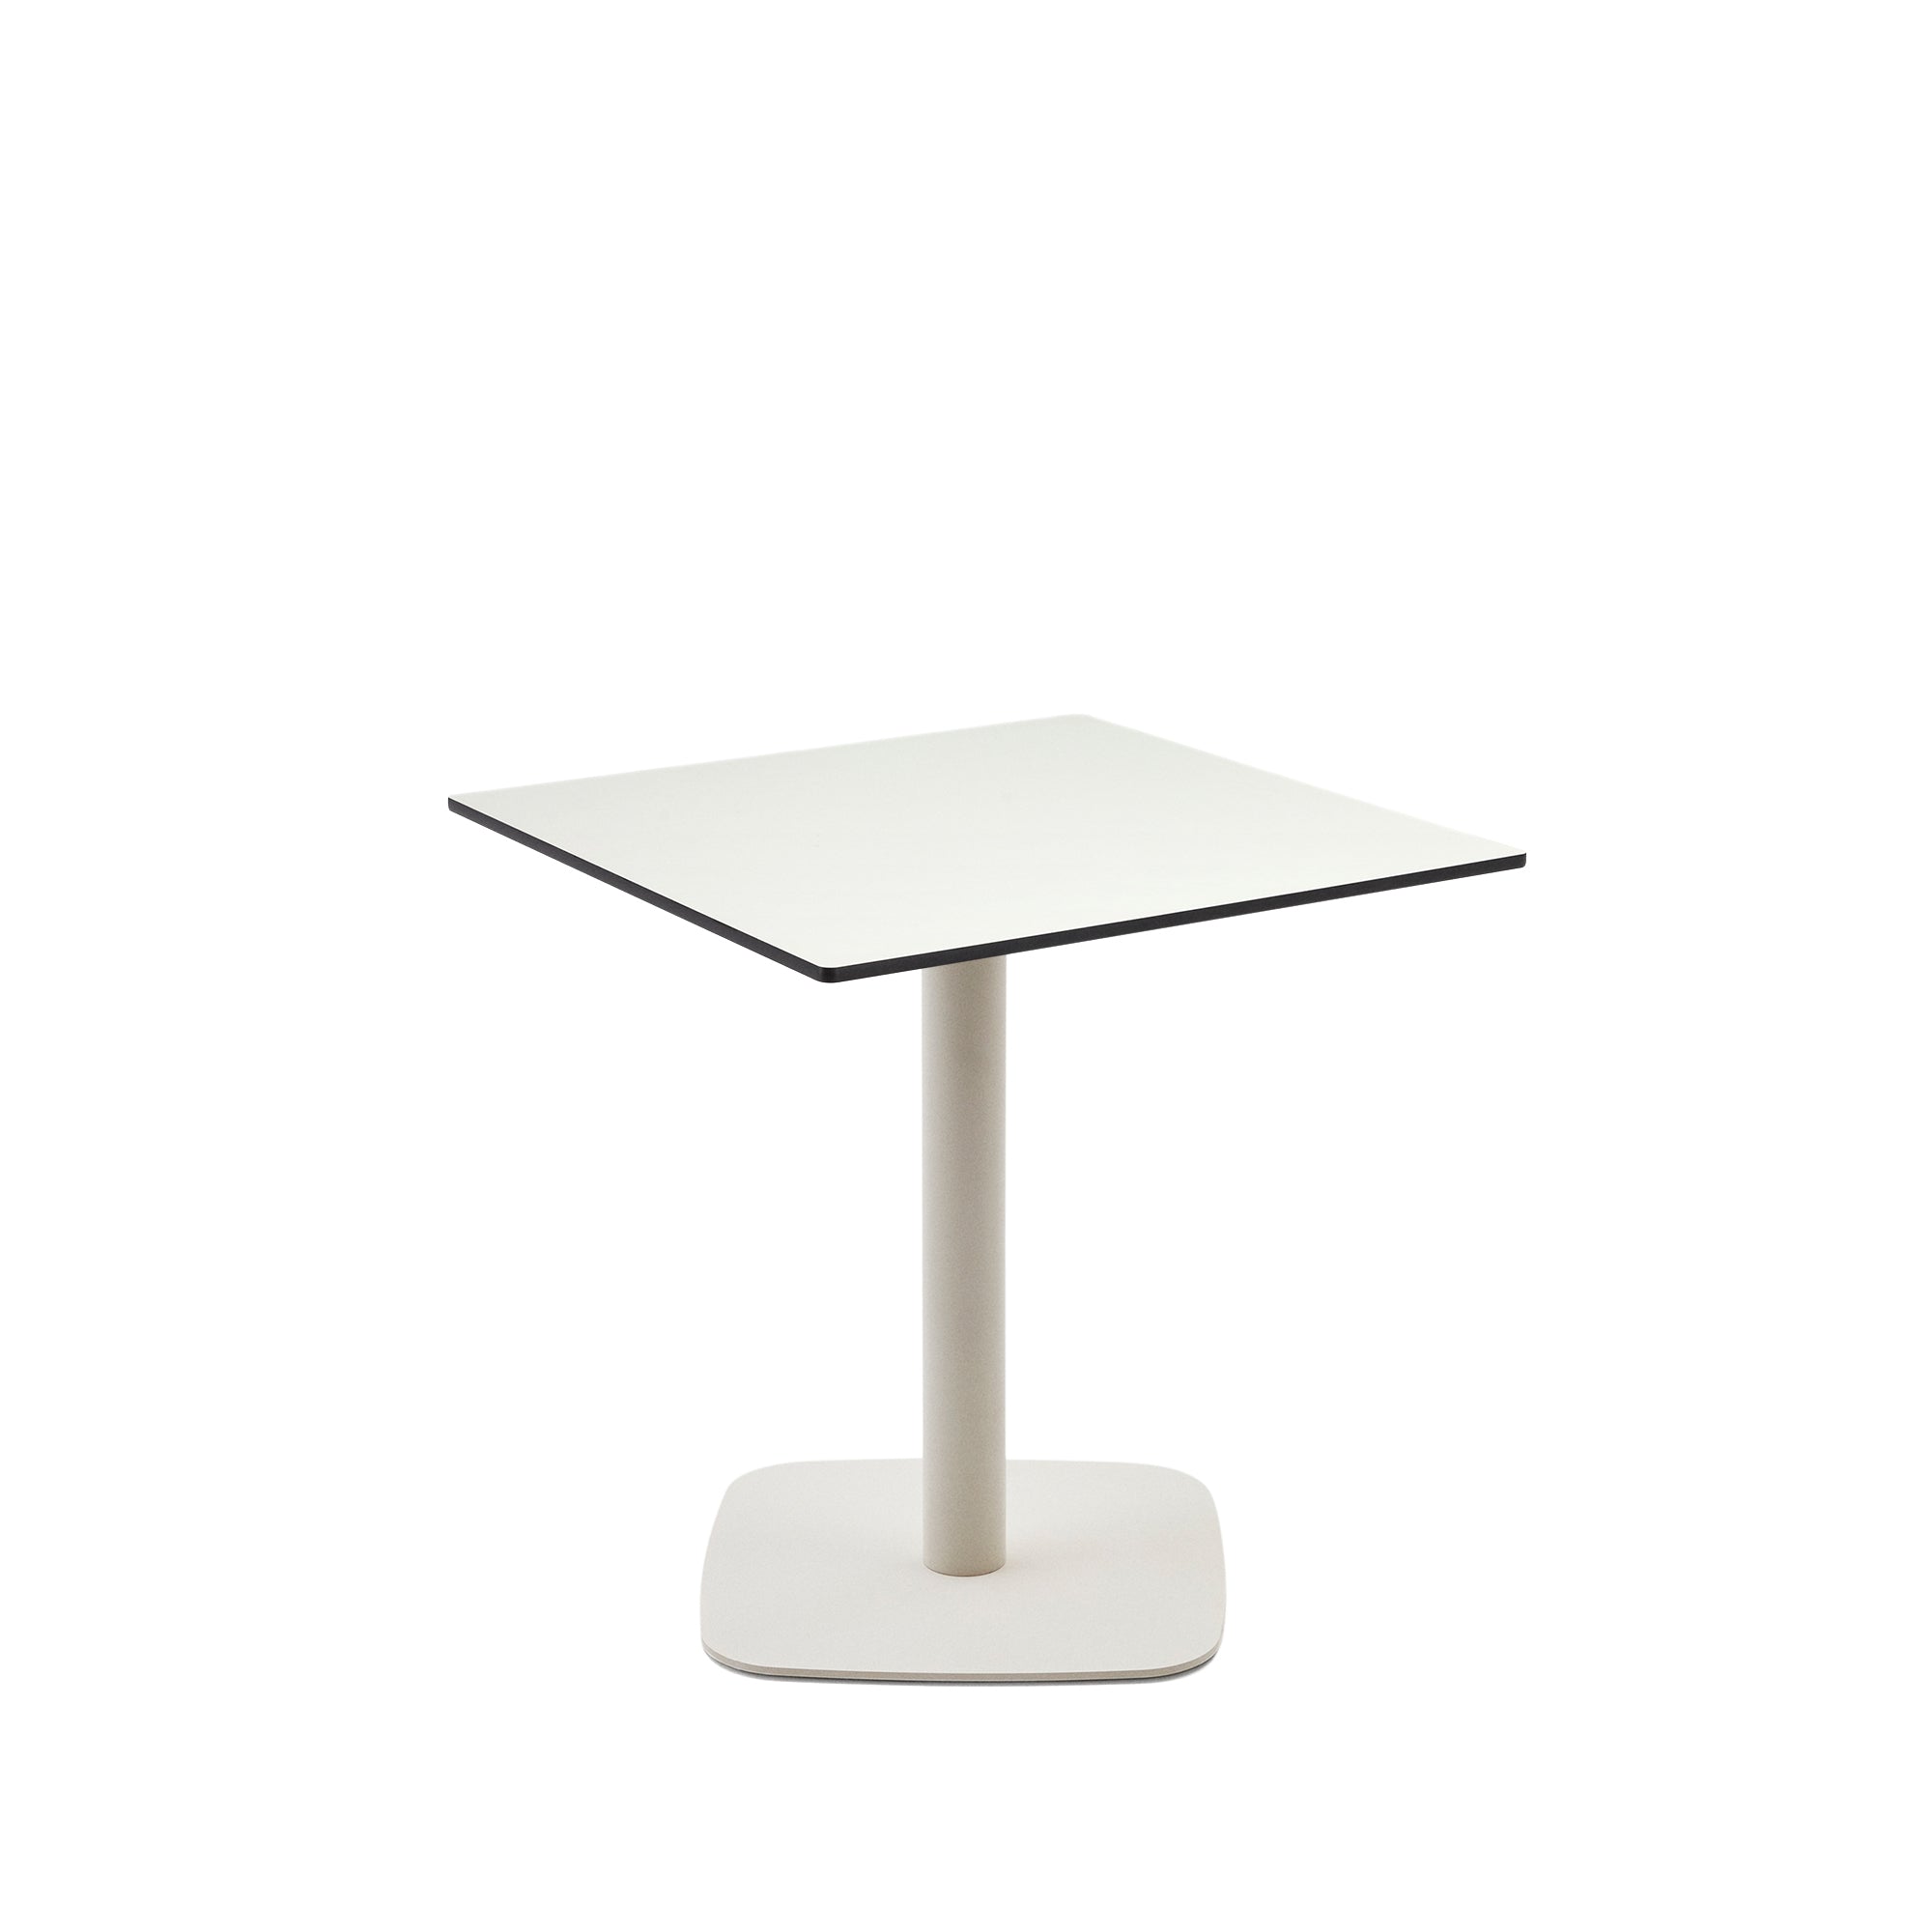 Dina outdoor table in white with metal leg in a painted white finish, 68 x 68 x 70 cm